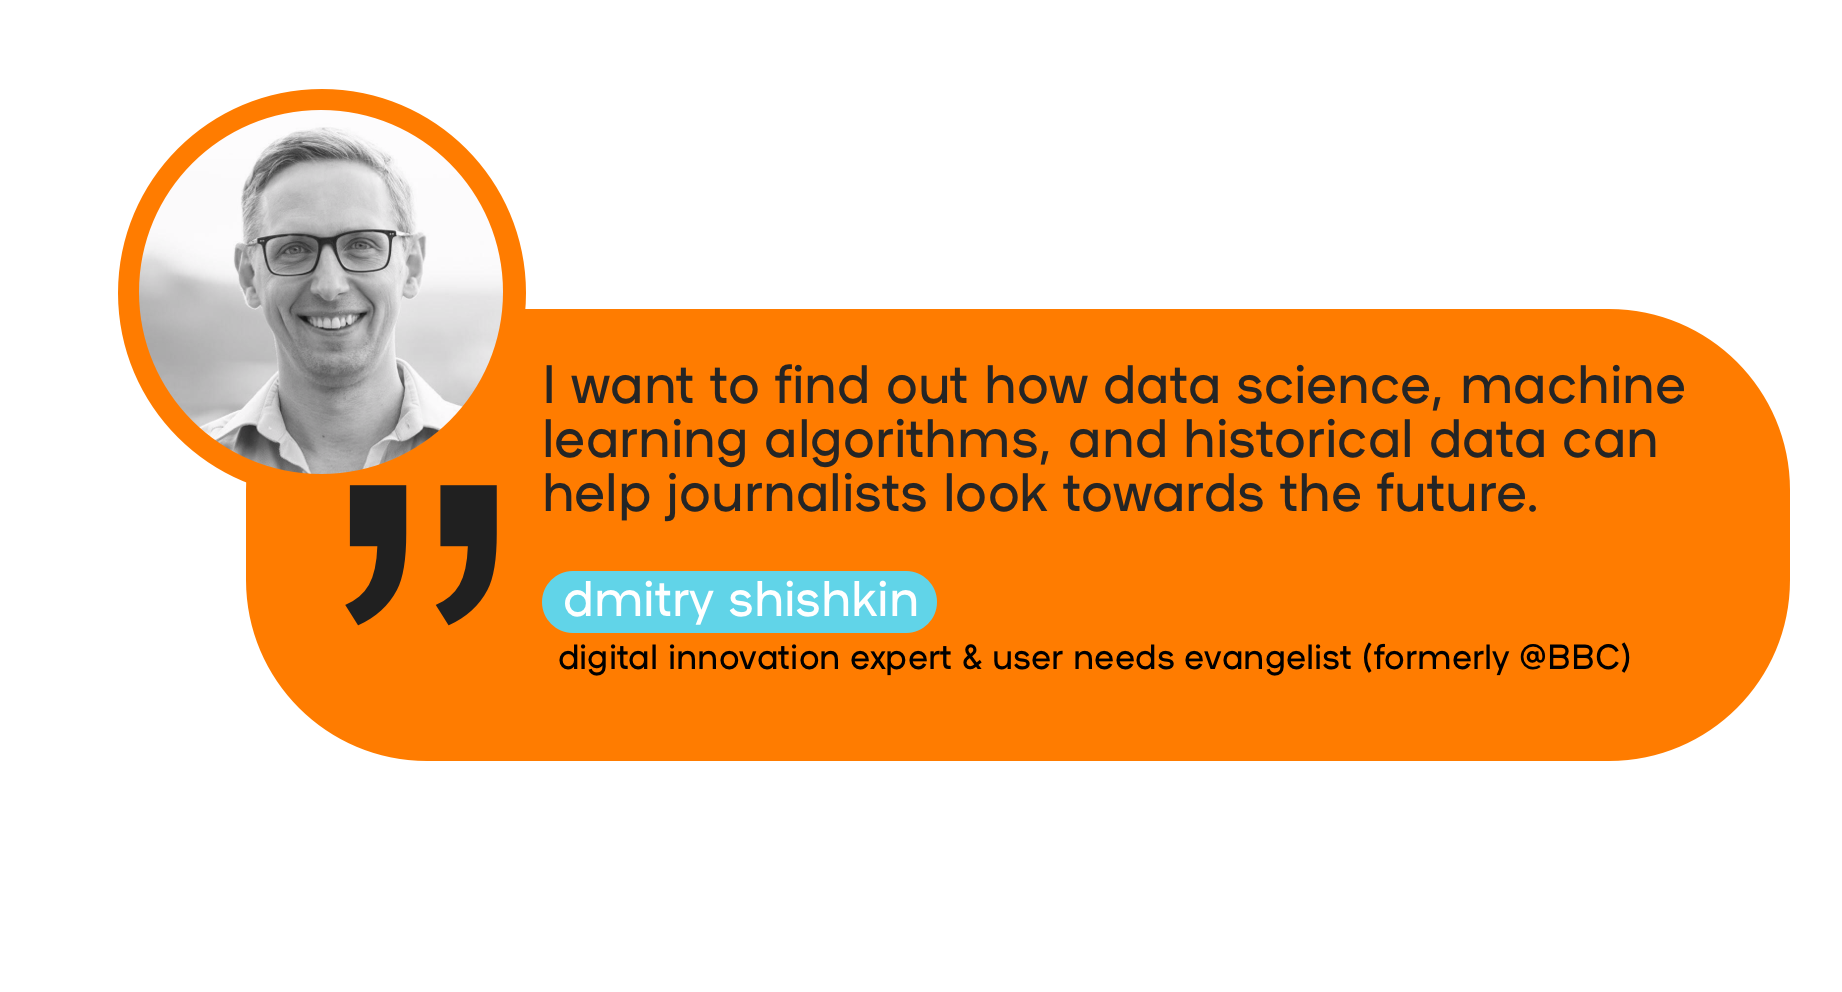 "I want to find out how data and machine learning can help journalists look toward the future."